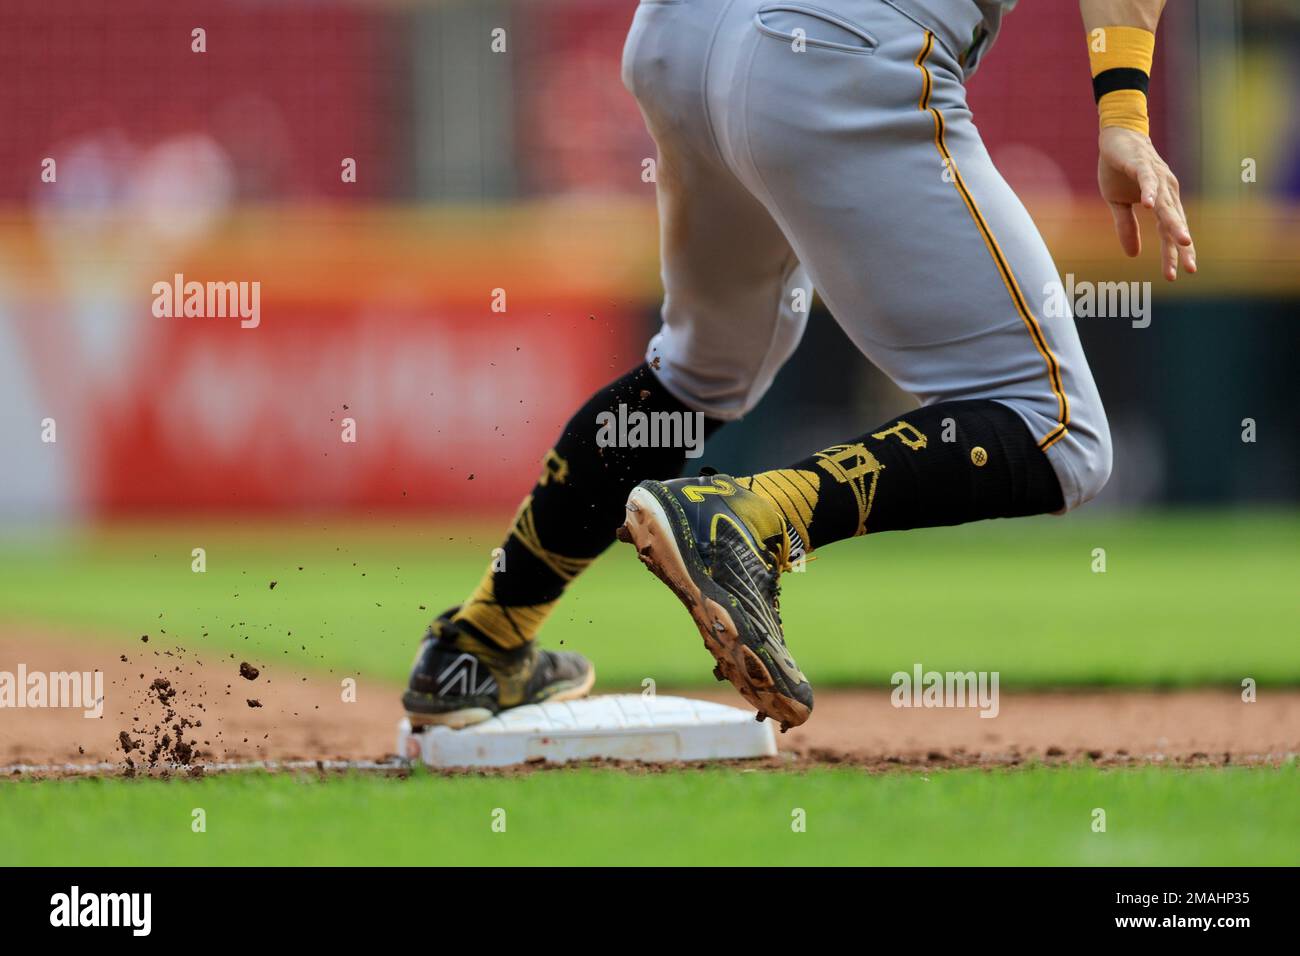 The cleats worn by Pittsburgh Pirates' Michael Chavis are seen as